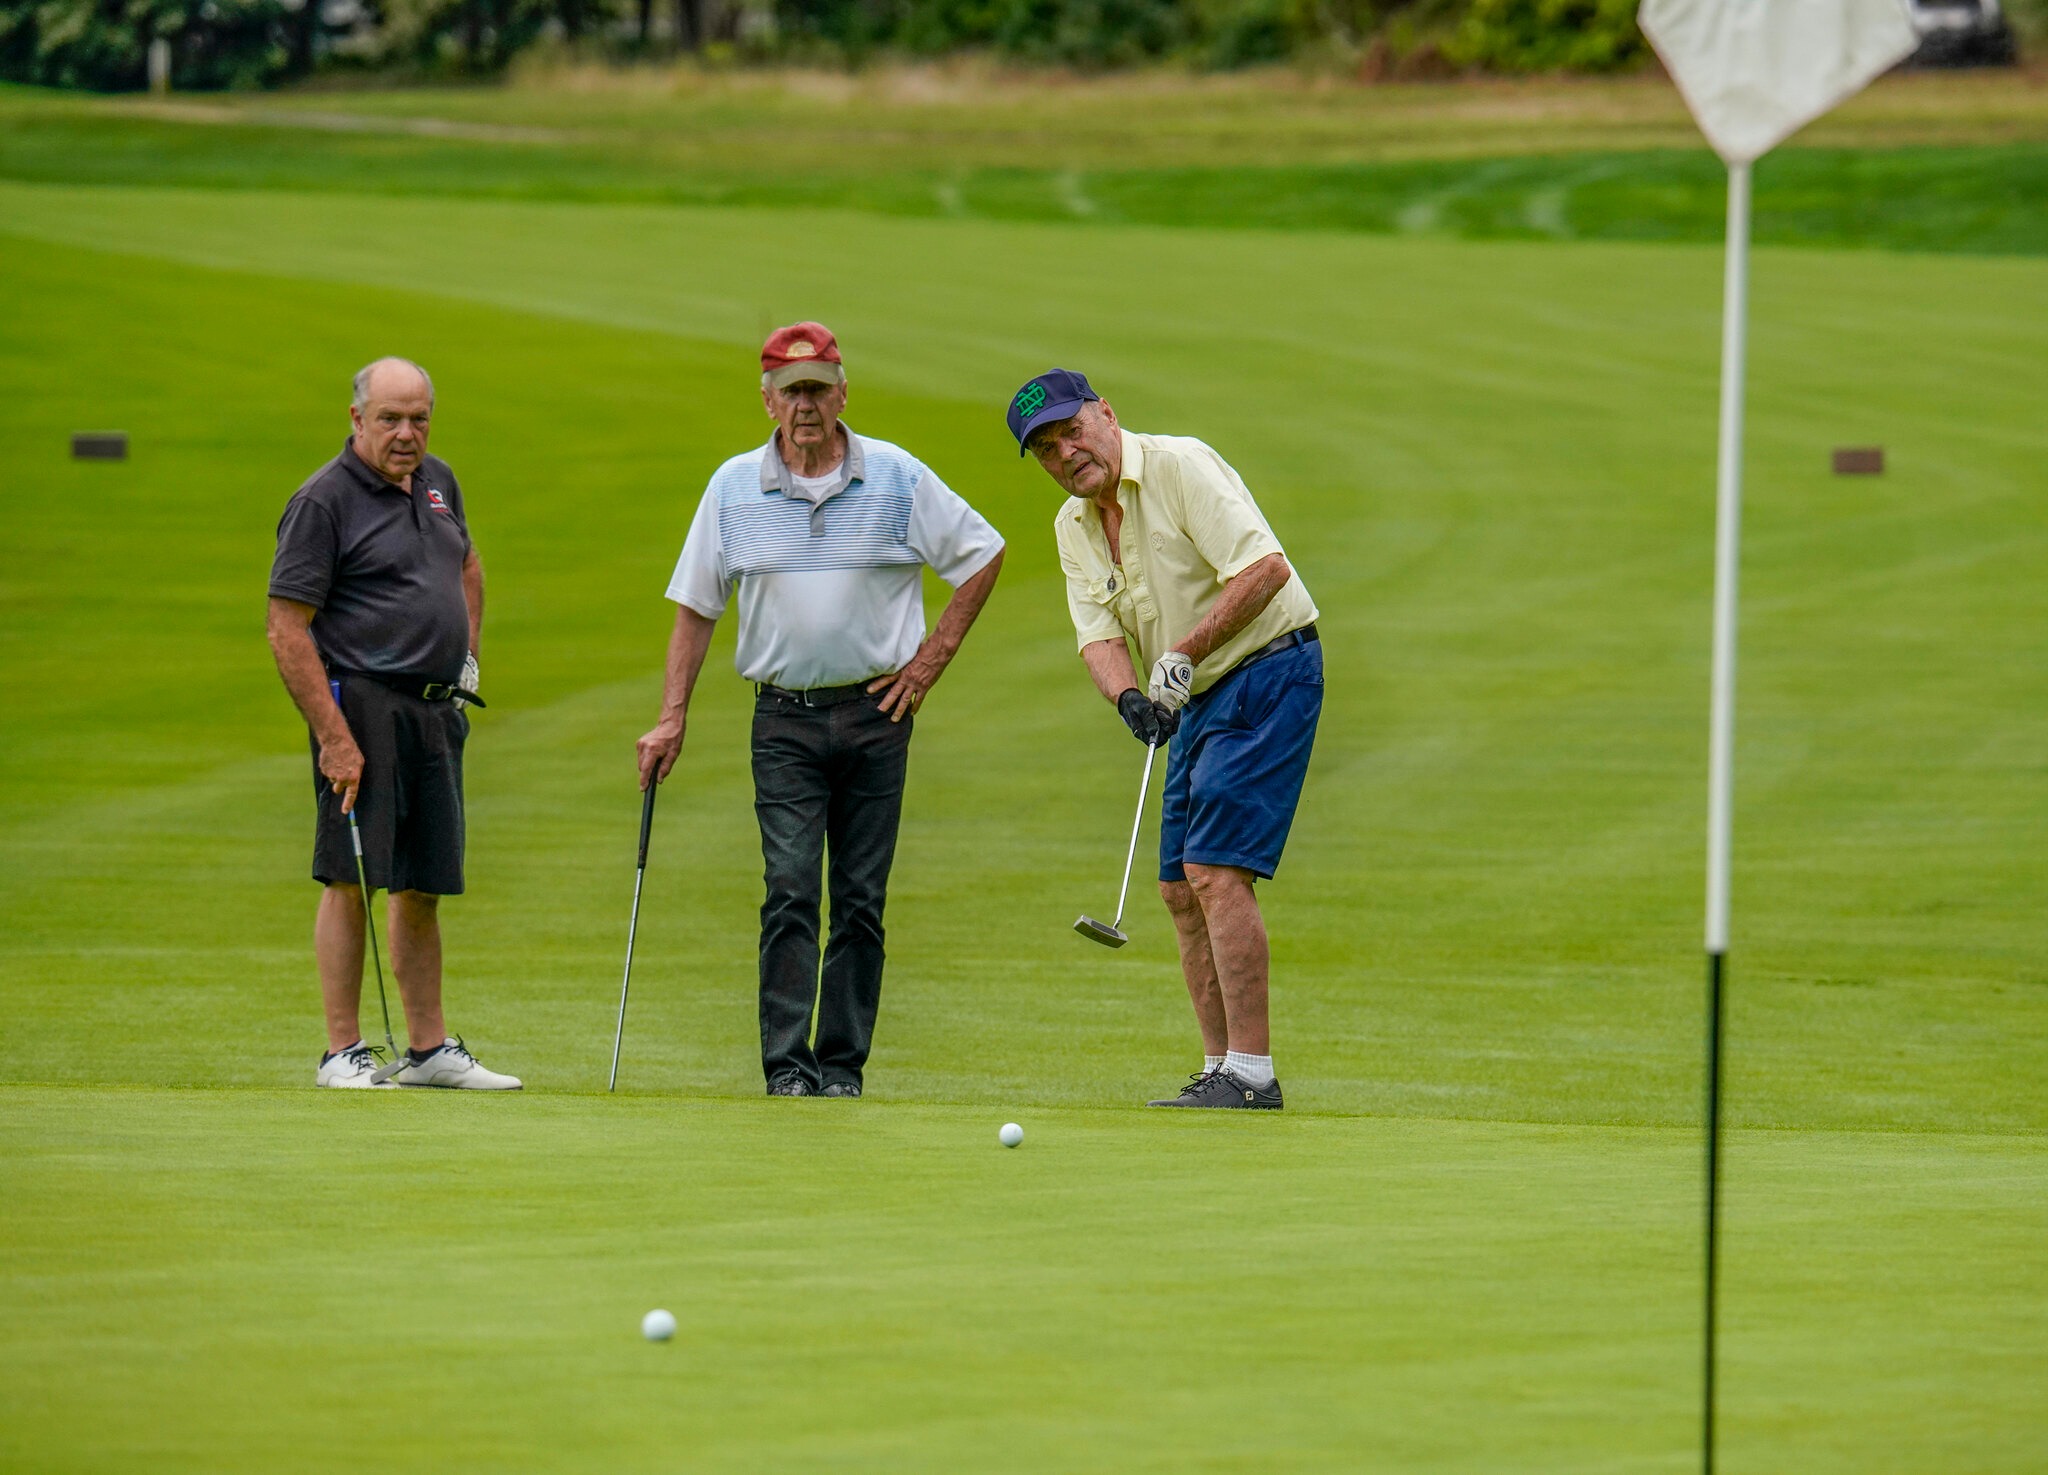 Three men playing on the green.